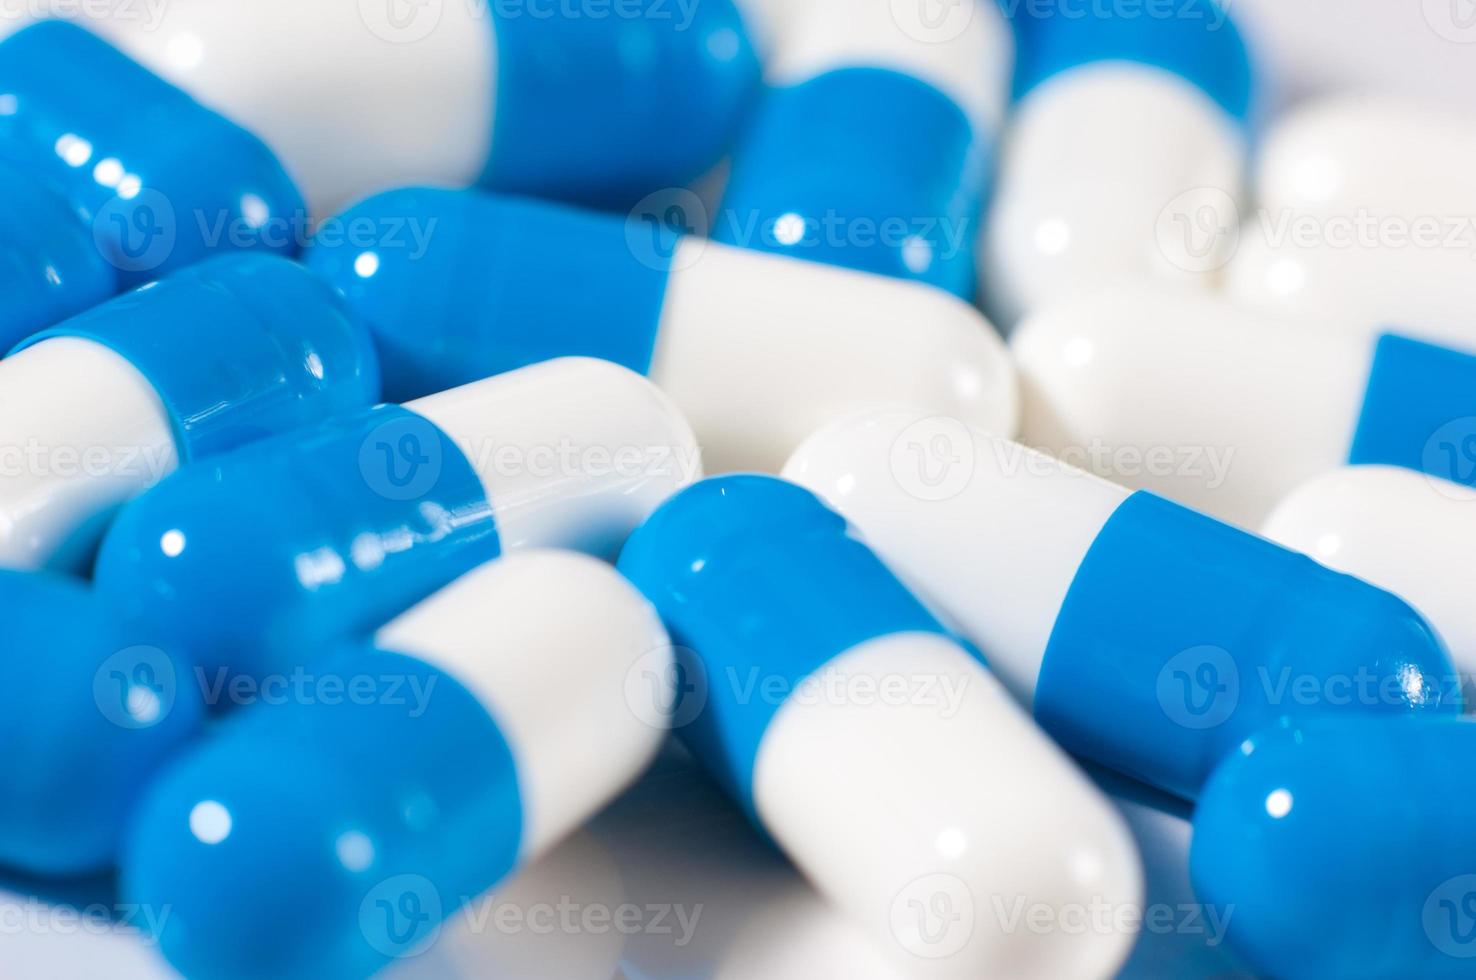 Background of blue and white capsule pills photo